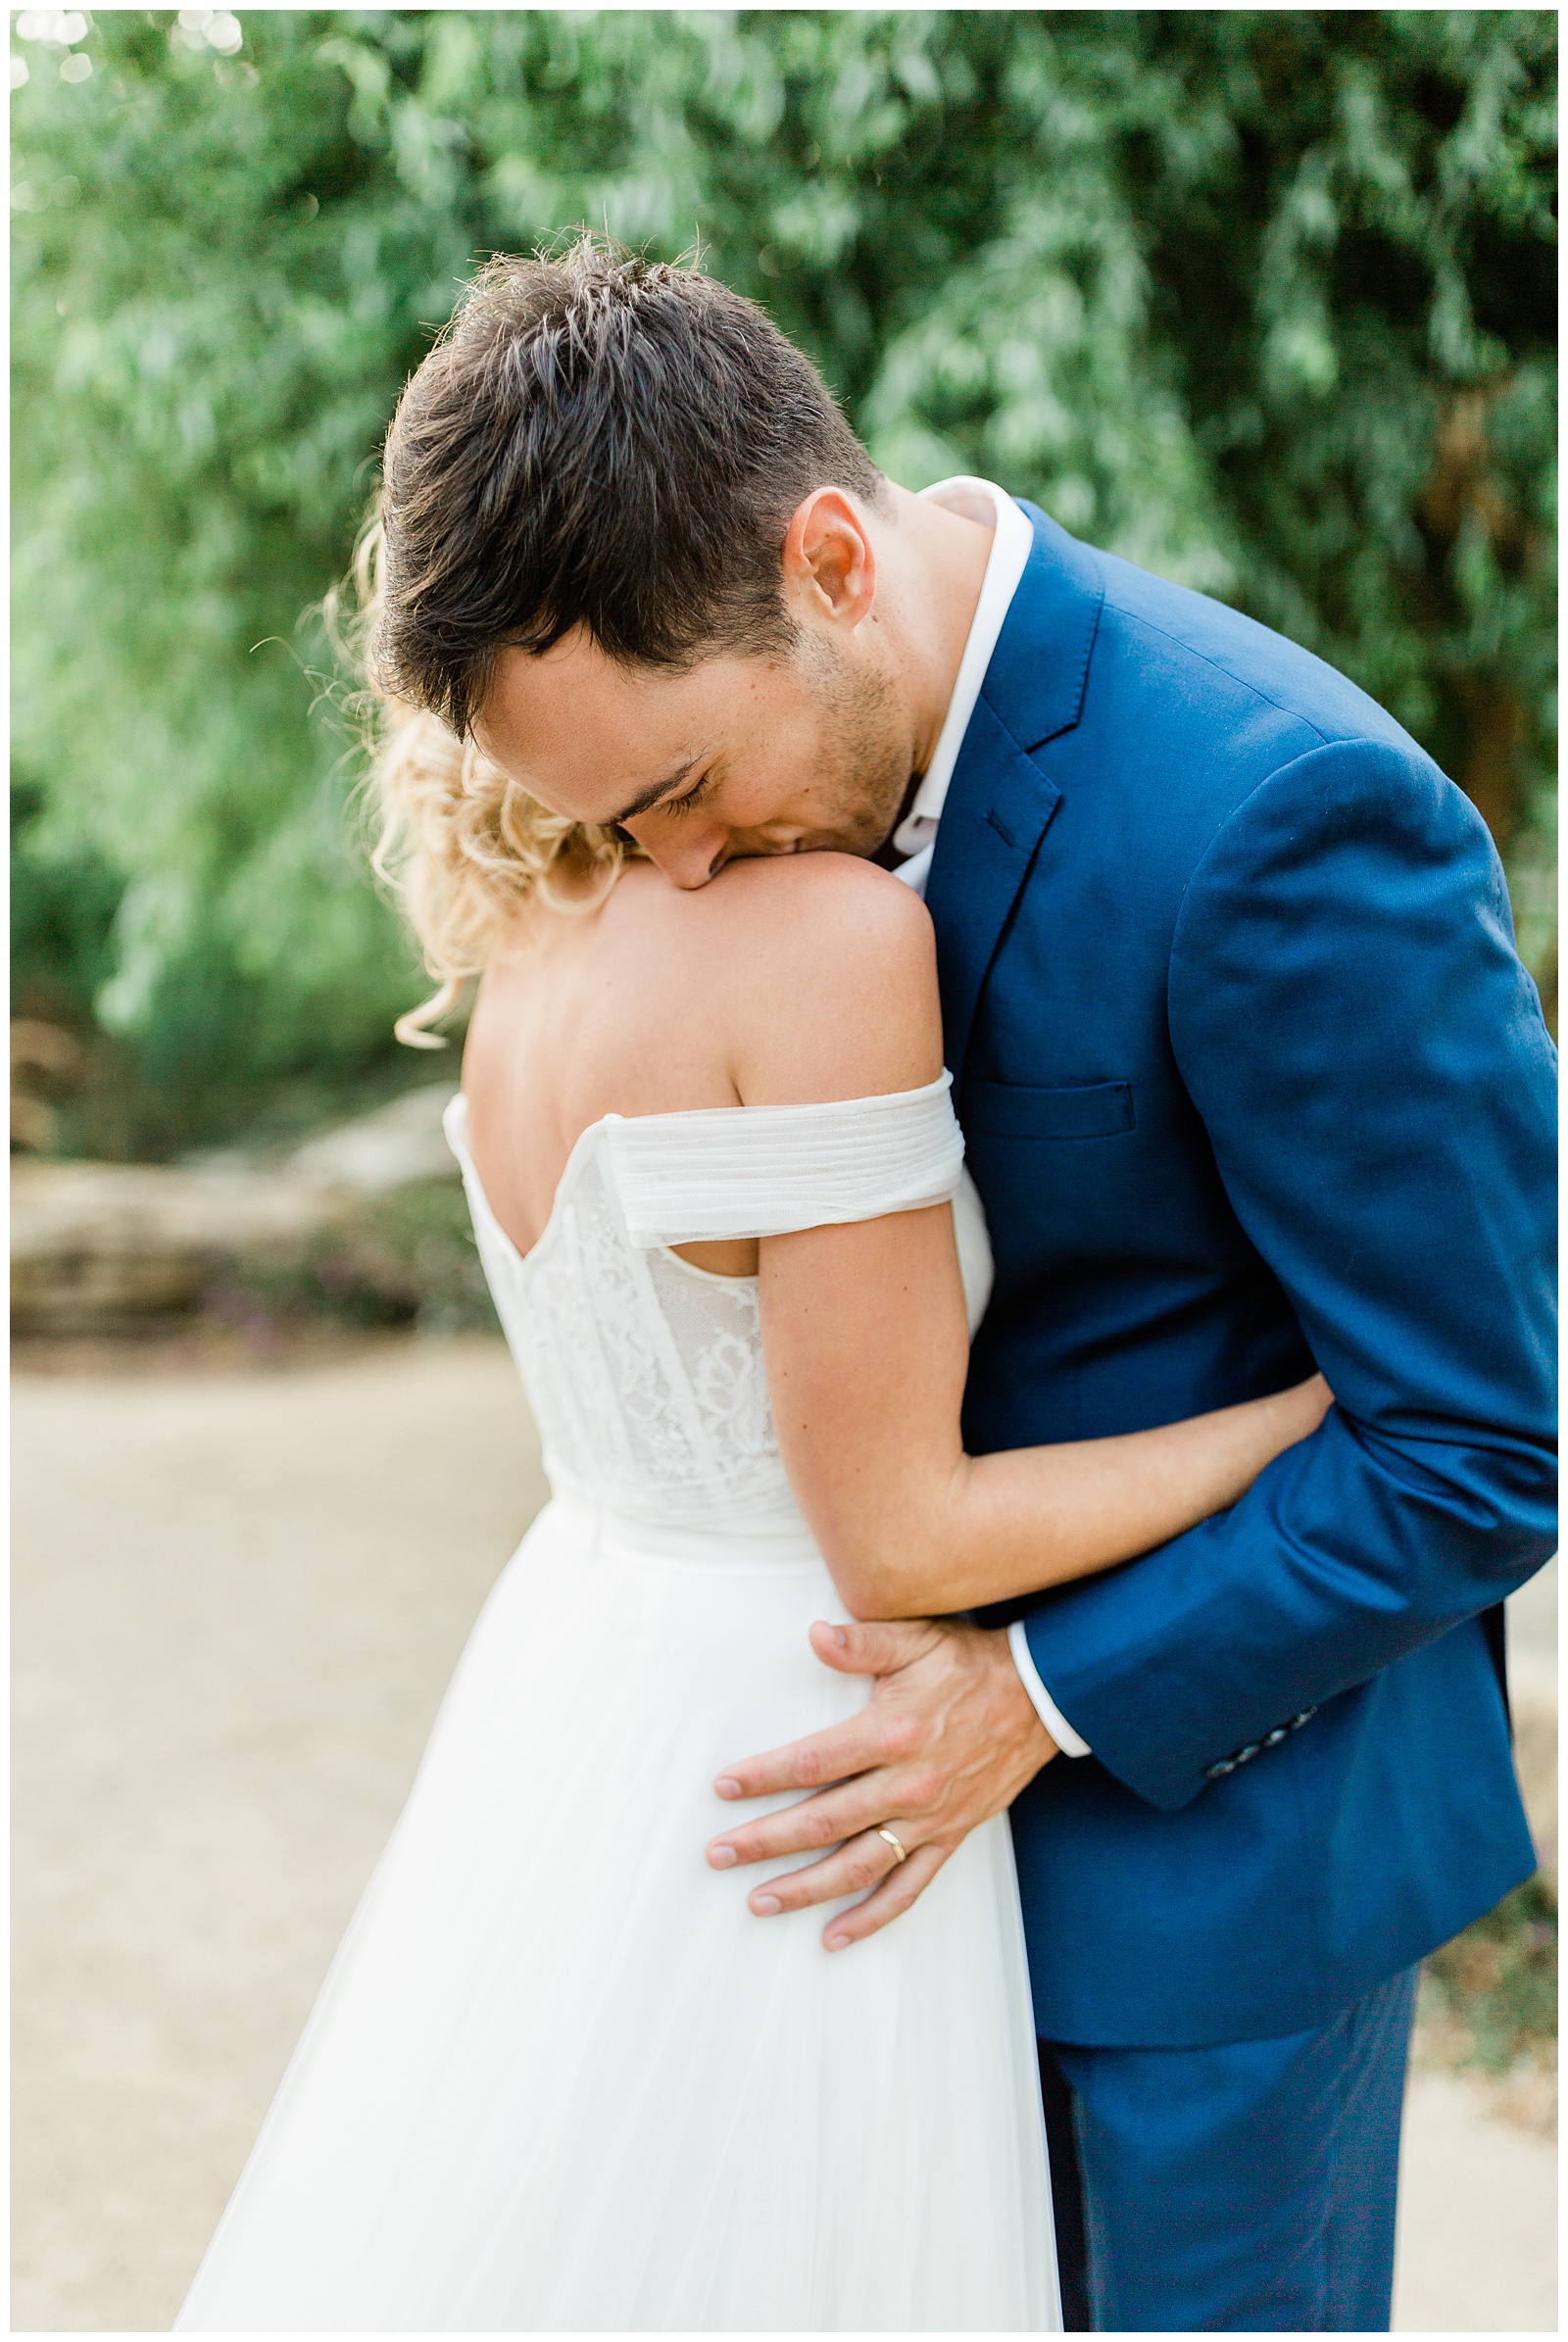 Intimate and romantic wedding portrait by Megan Helm Photography, a Fresno Wedding Photographer